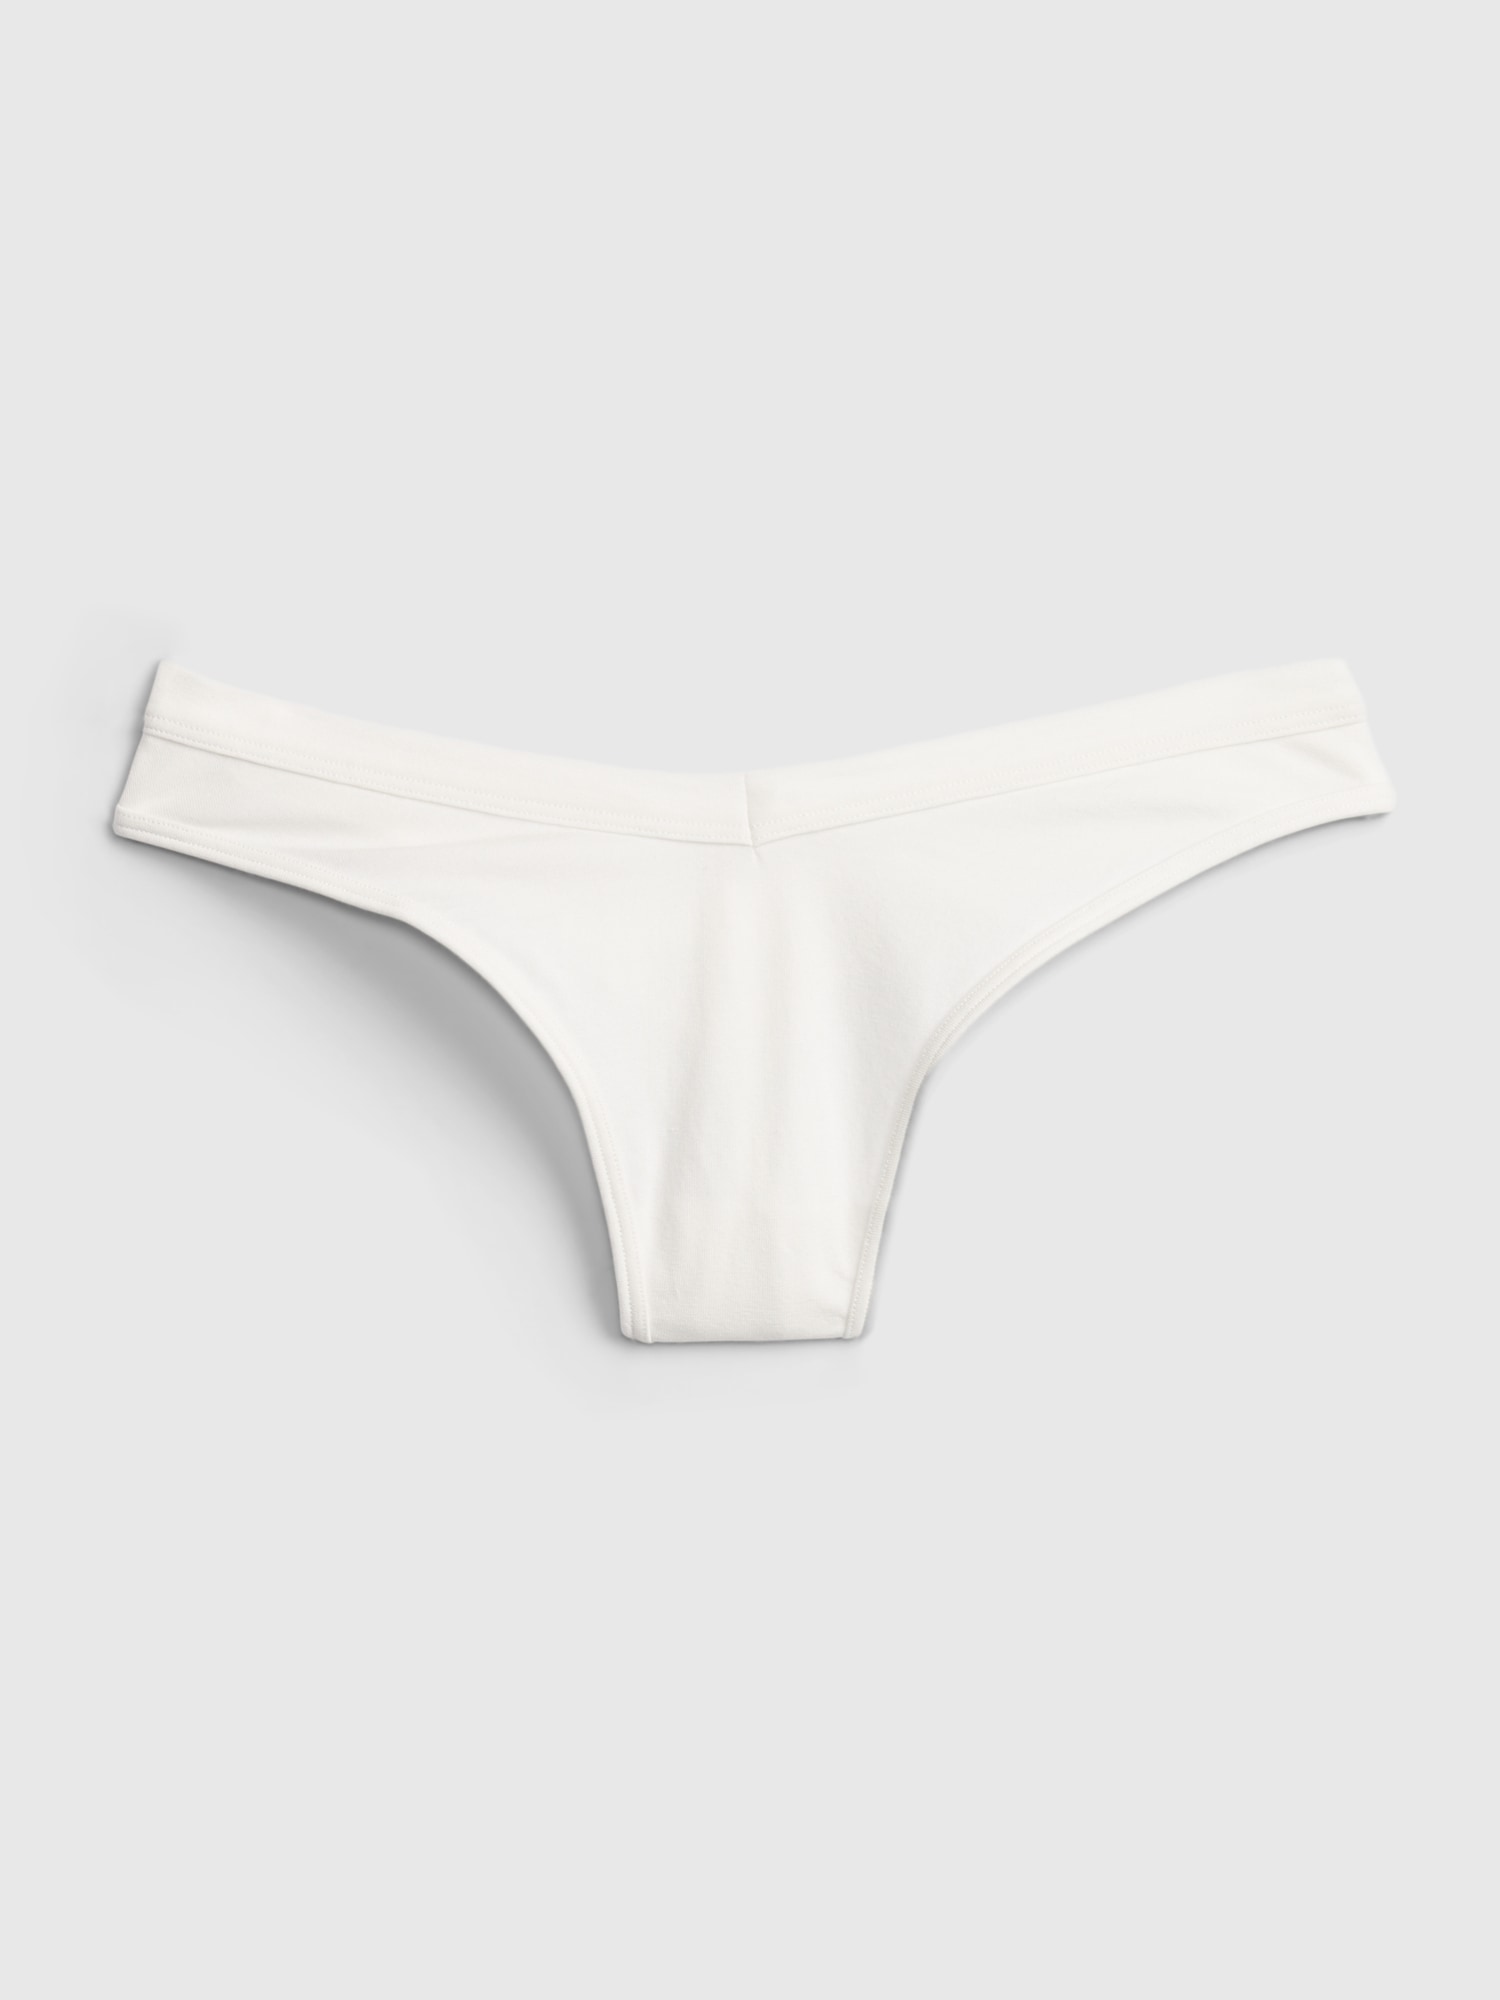 The Cotton Thong